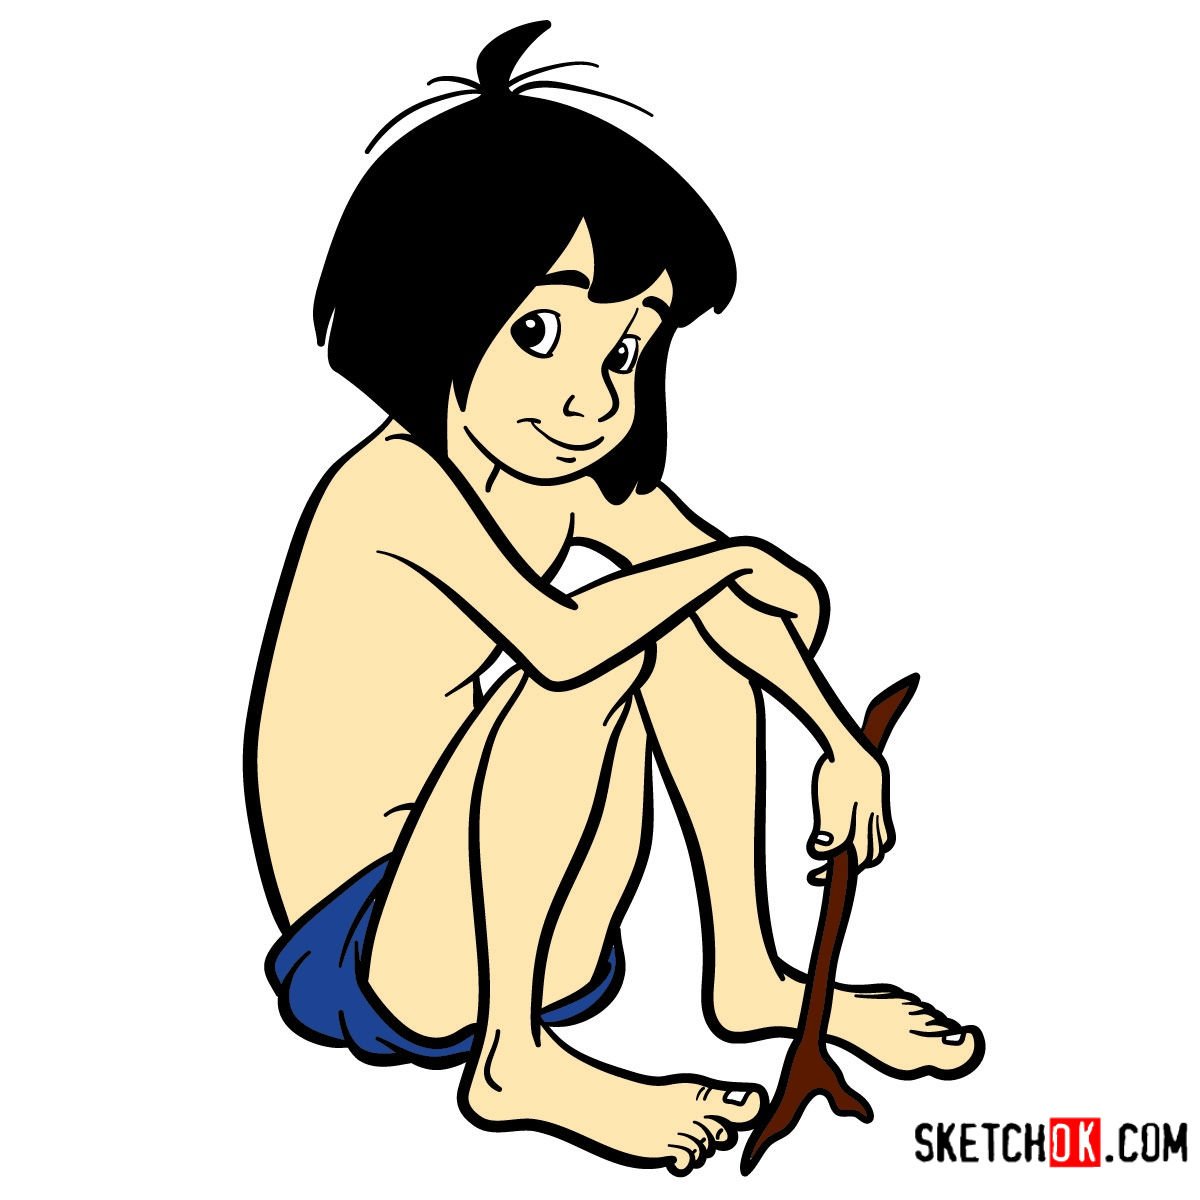 How to draw Mowgli | The Jungle Book - Sketchok easy drawing guides